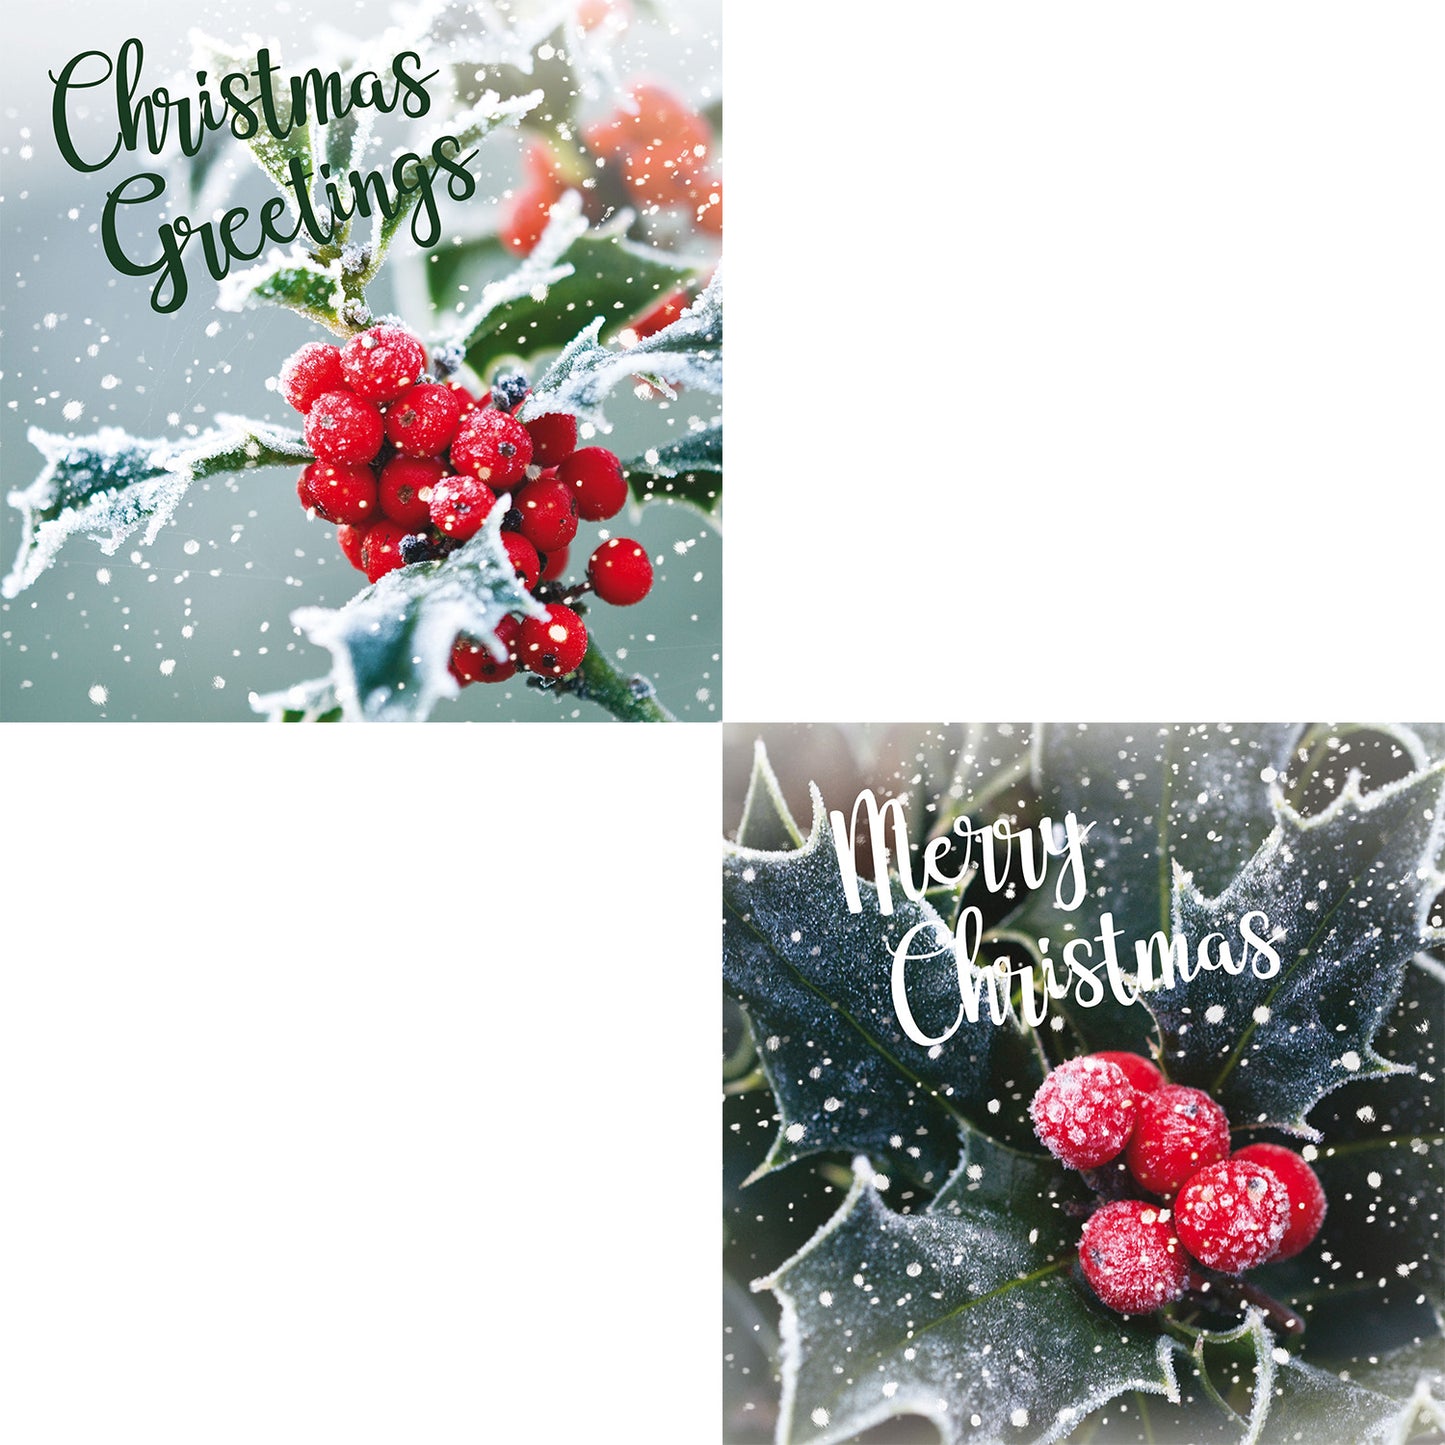 Assorted Christmas Cards - Holly Greetings